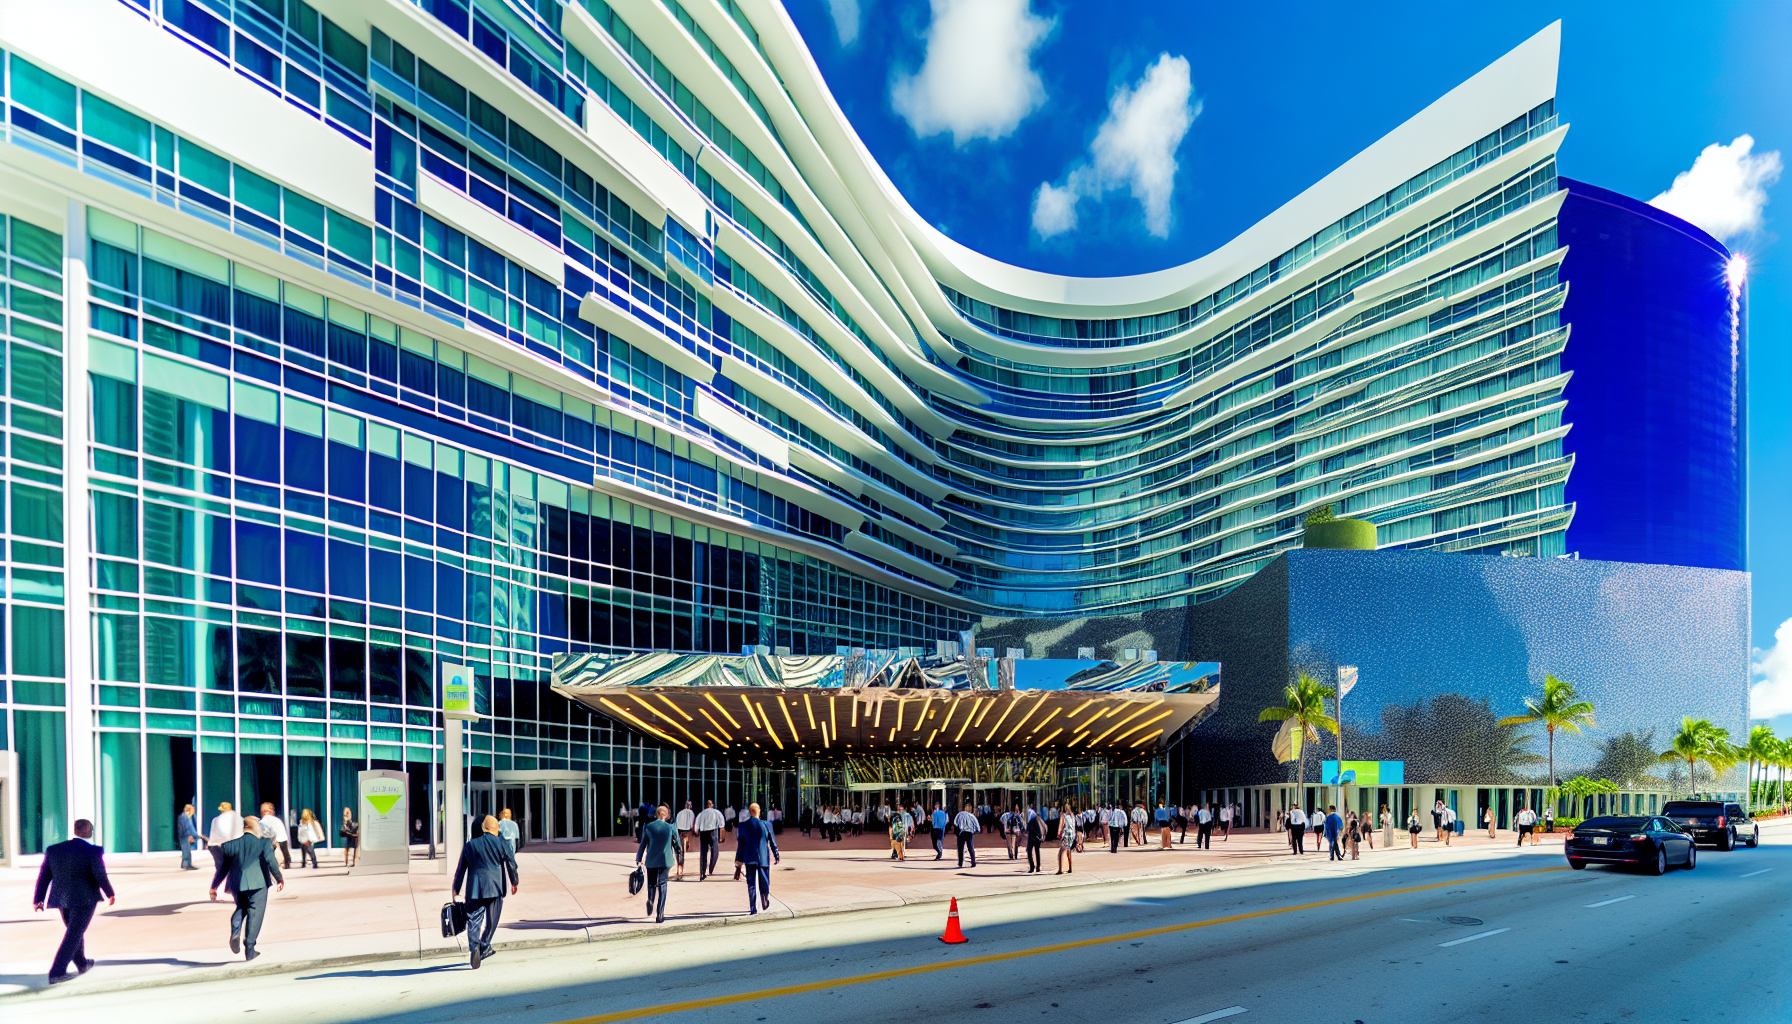 Photo of the JW Marriott Marquis Miami, the host hotel for the conference